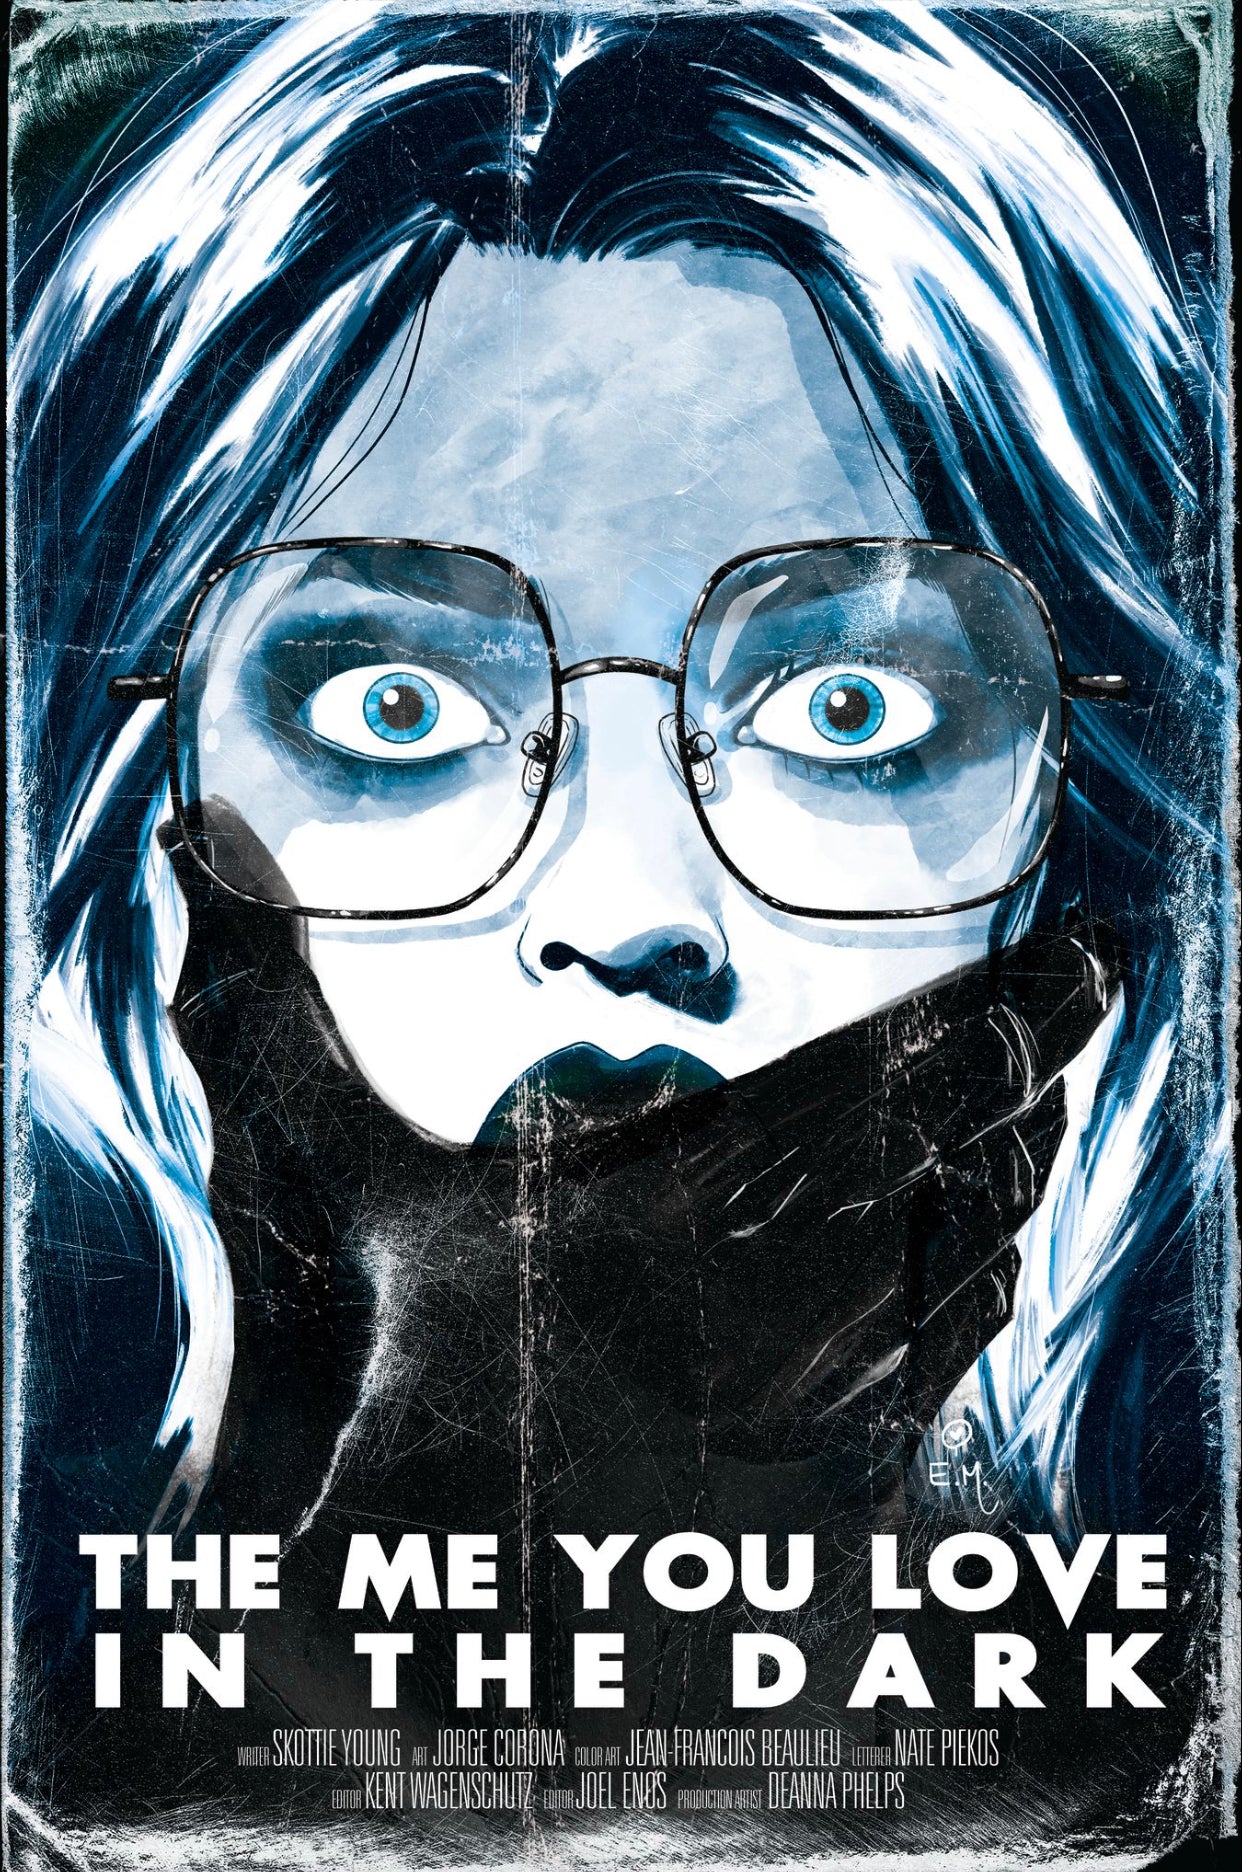 THE ME YOU LOVE IN THE DARK #1 HUTCHISON-CATES 616 Variant A Scream Homage LTD 750